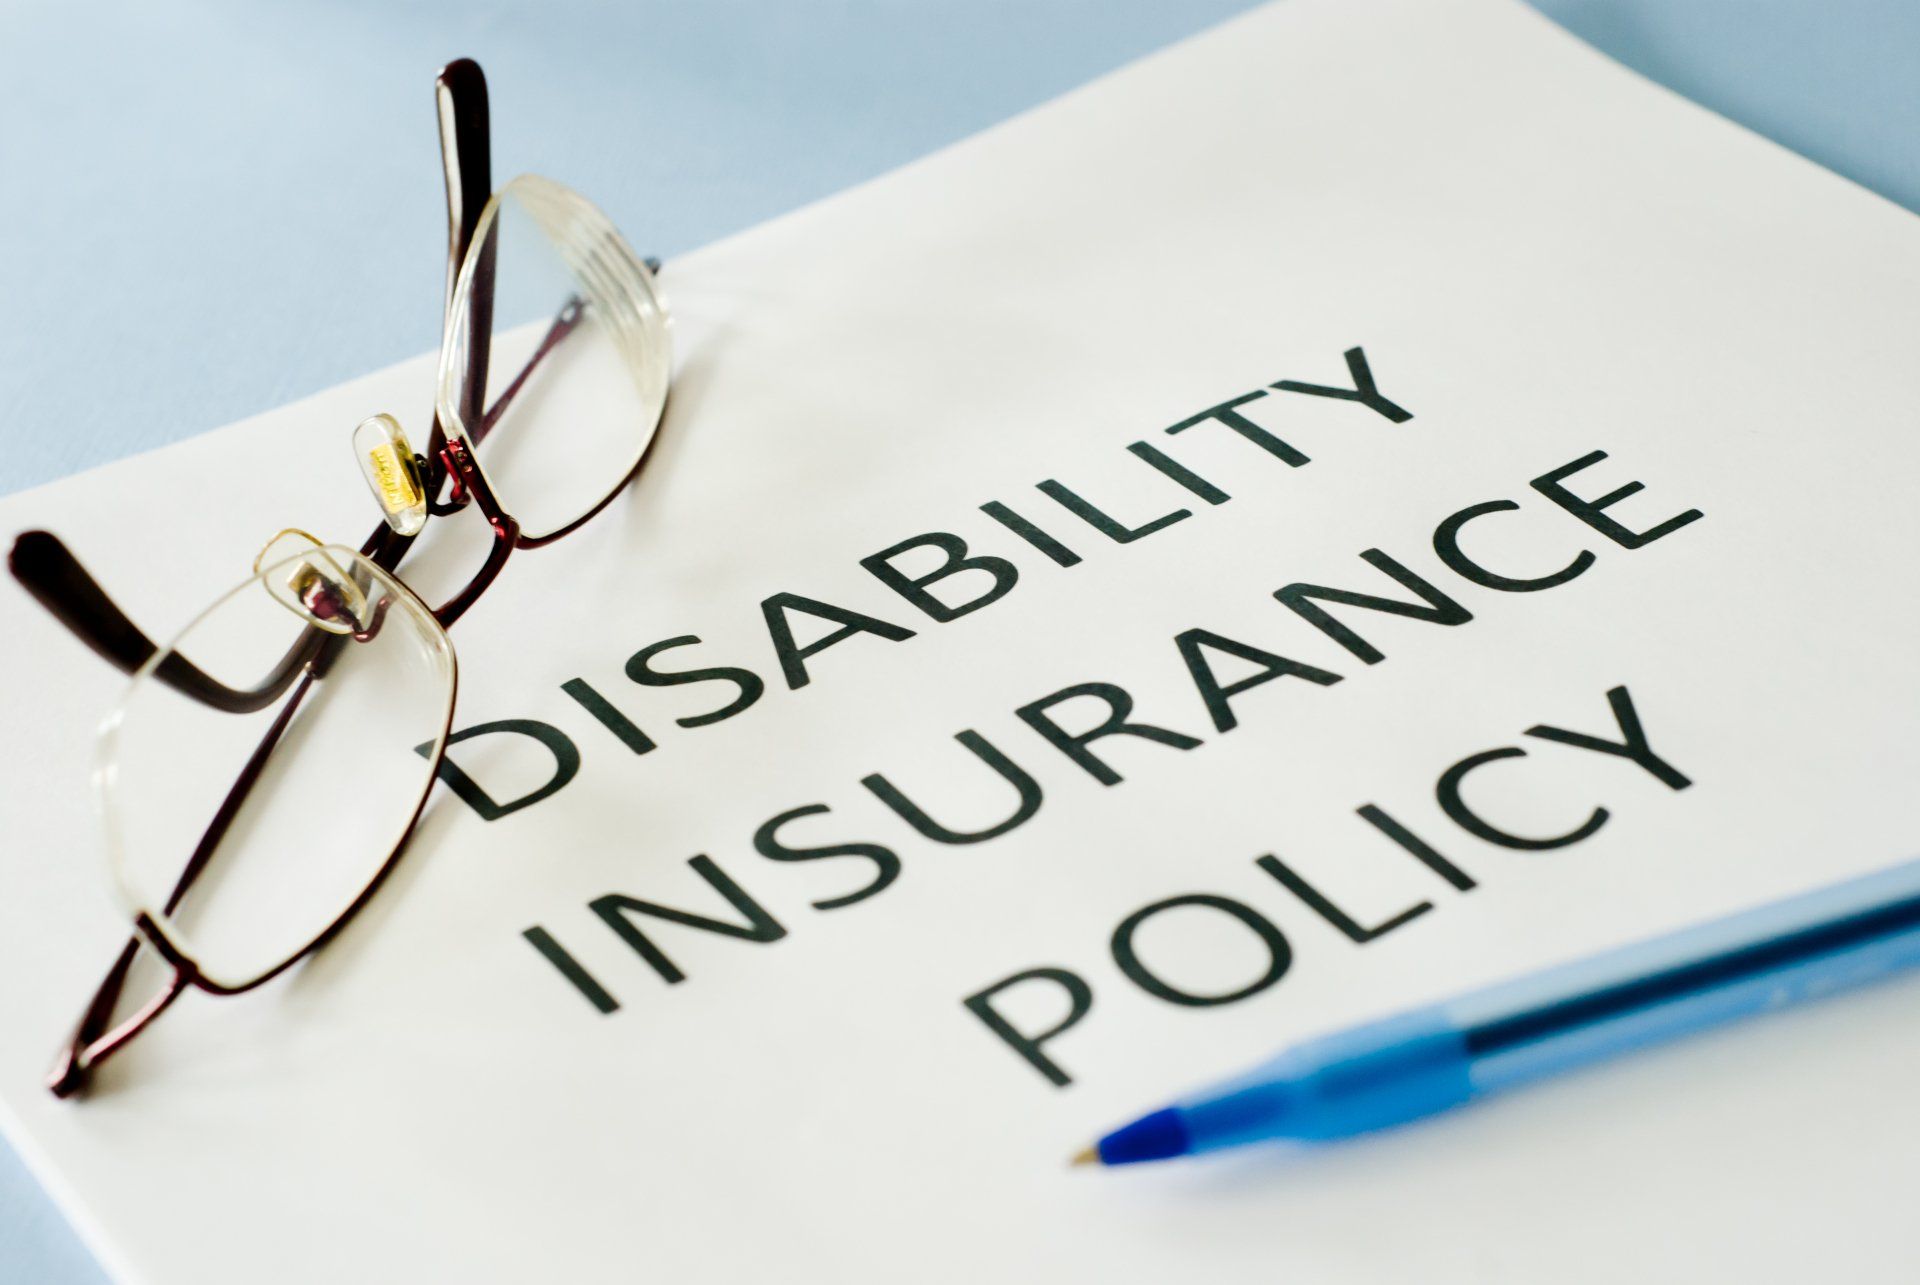 Disability Insurance Policy document with glasses and pen